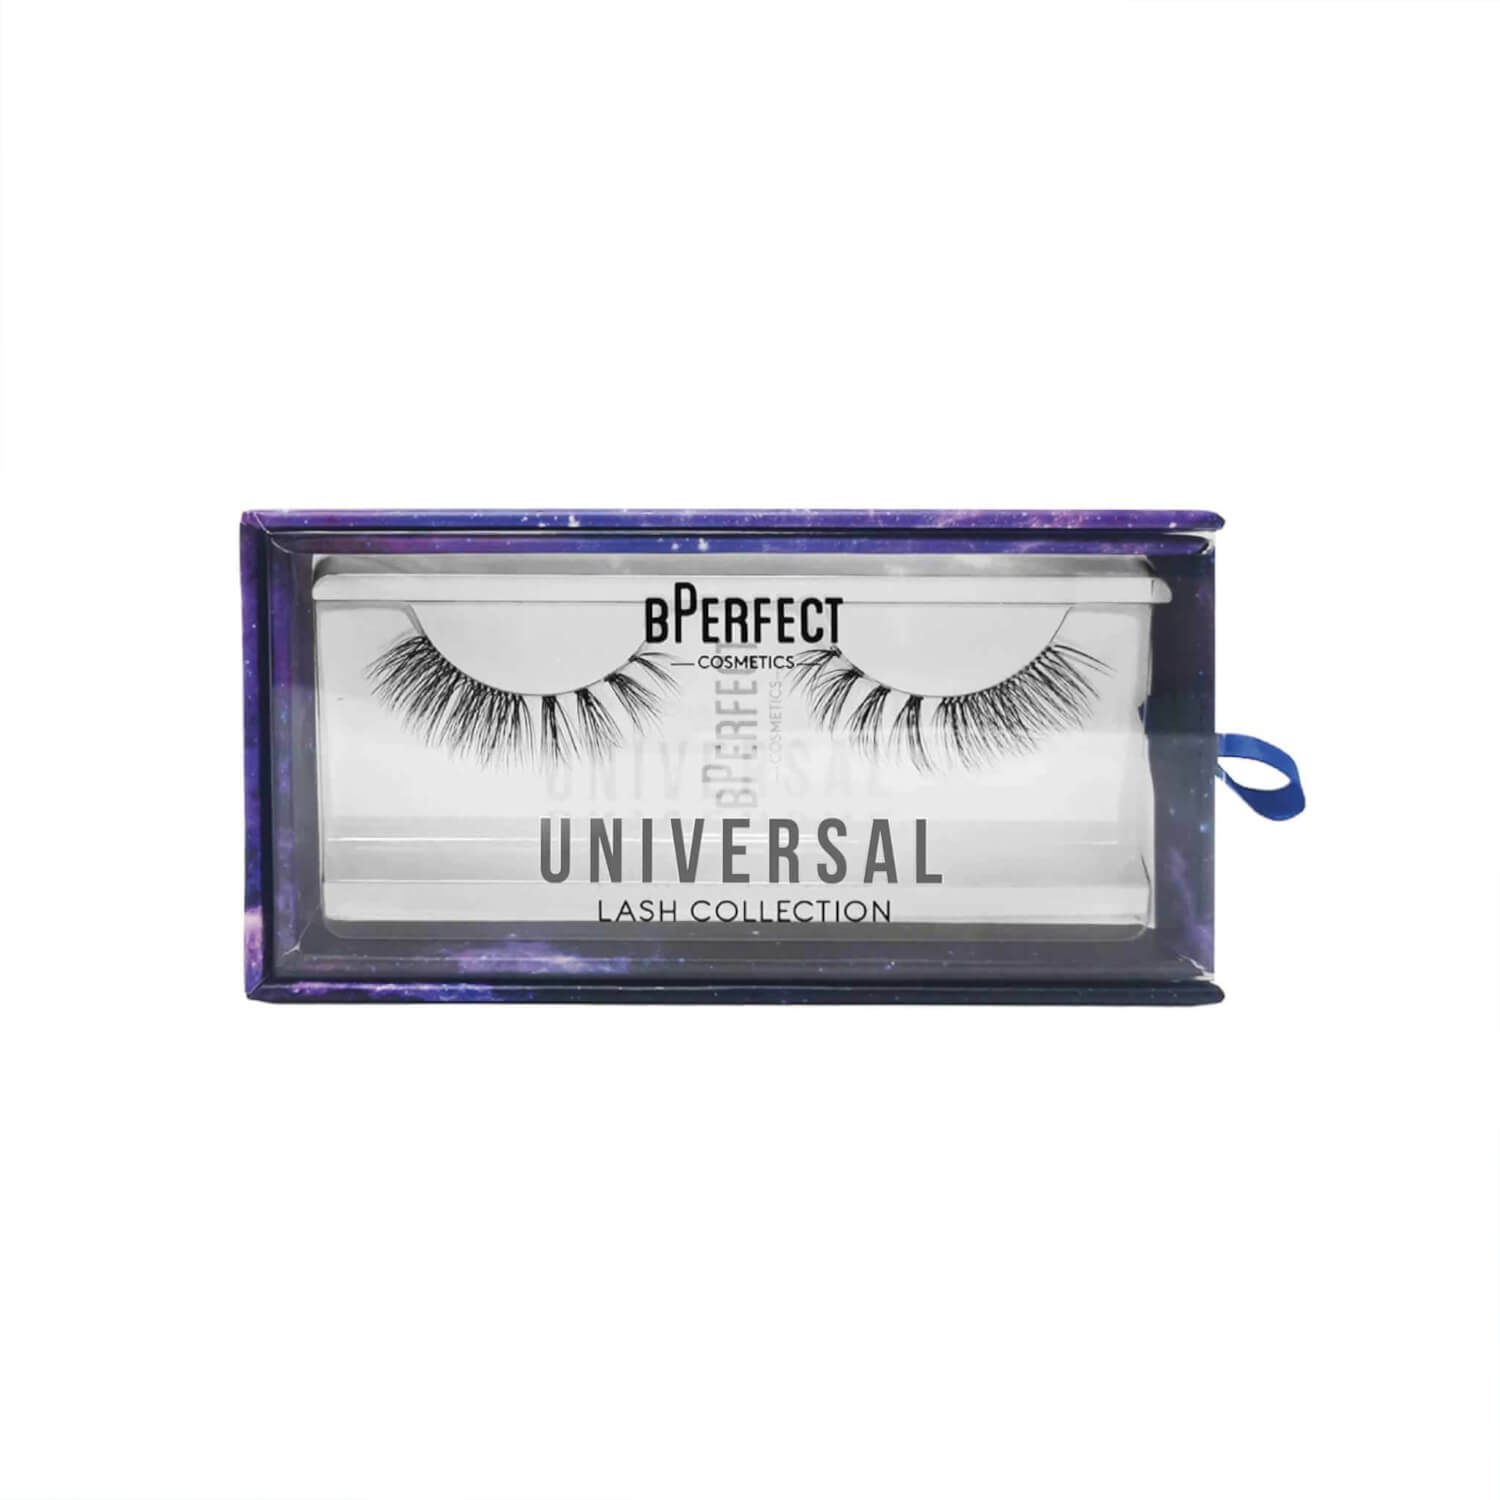 Bperfect Universal Lash - SIGNS 1 Shaws Department Stores